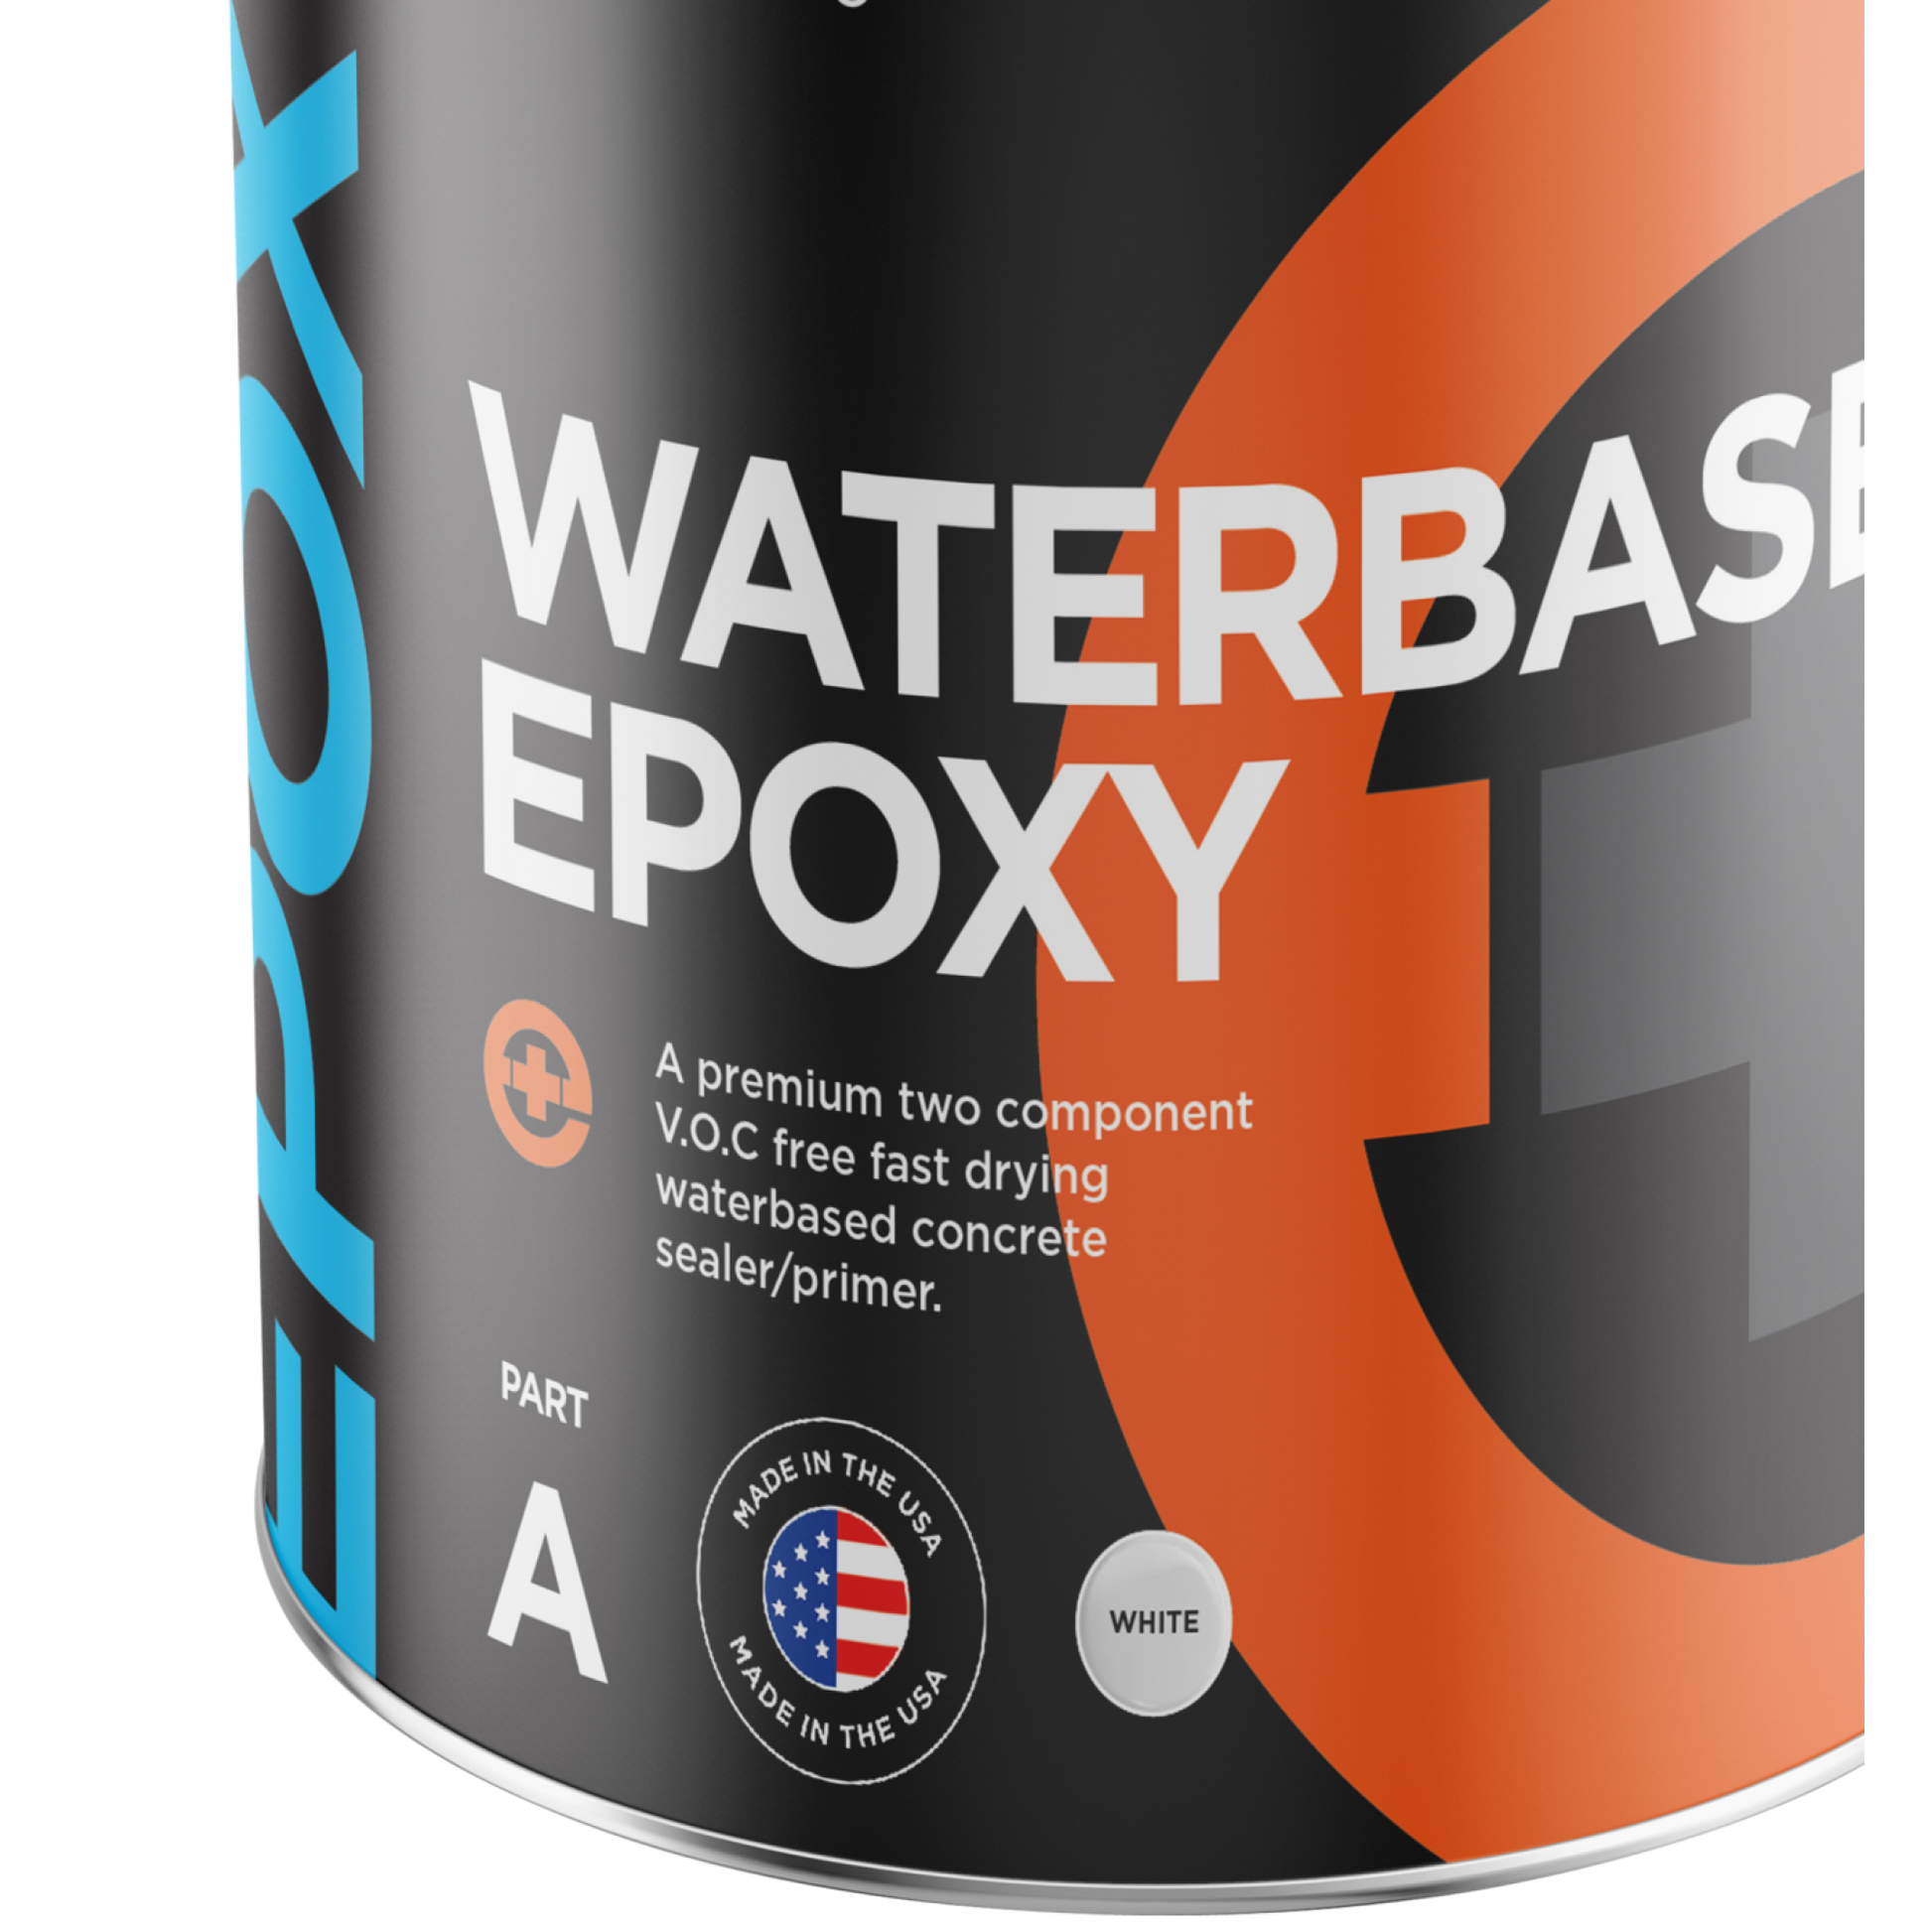 Transform Spaces with Ease: 1.25 Gal White Water-Based Epoxy - Covers 400-500sf